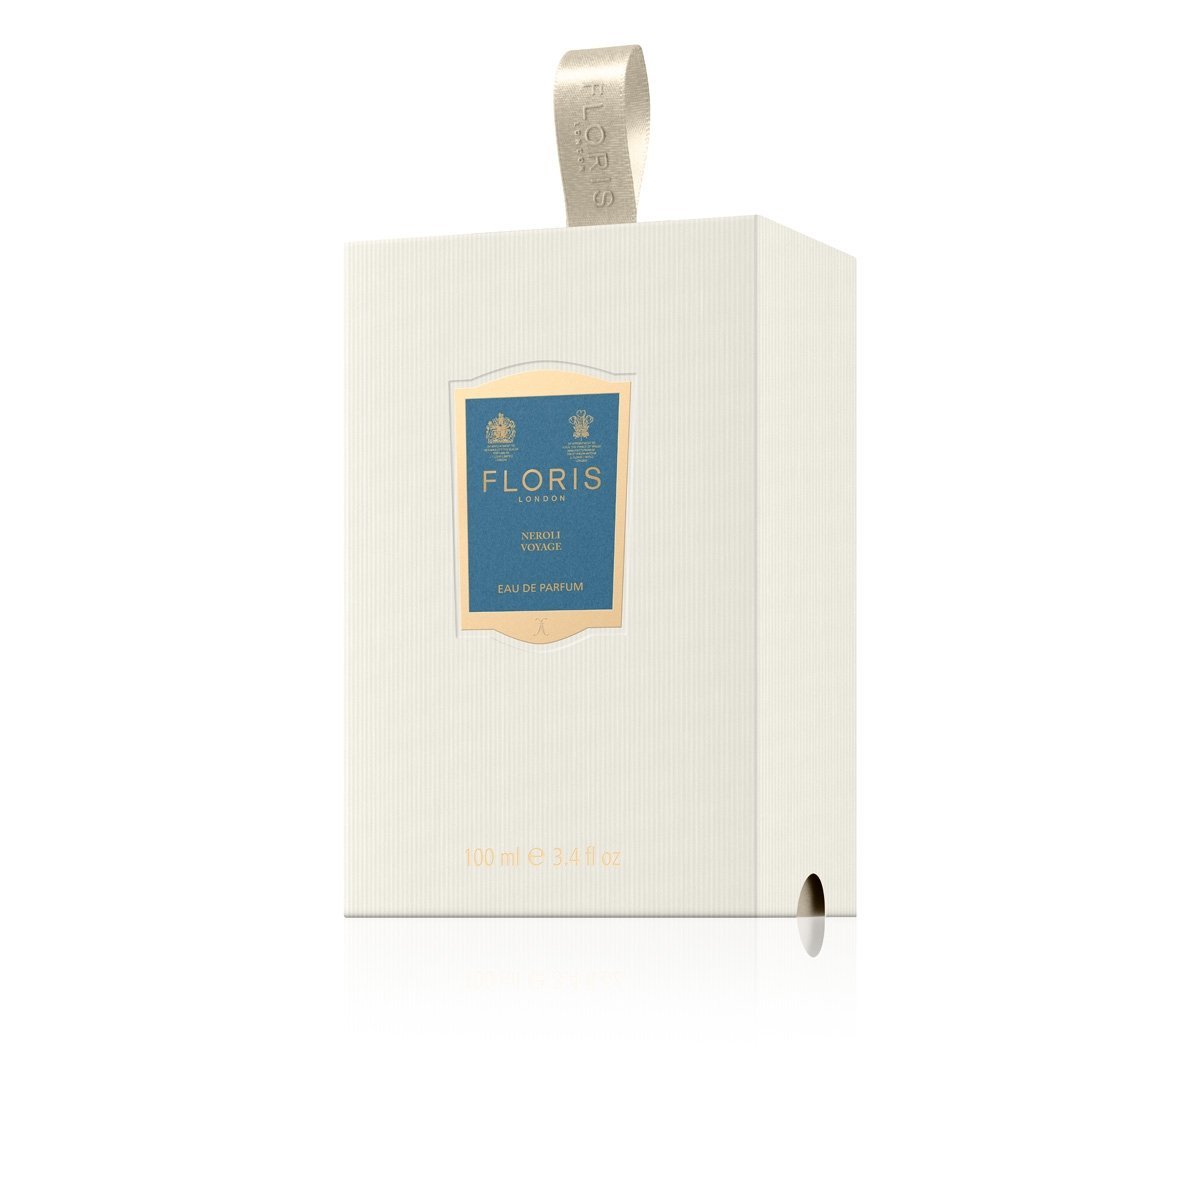 A white box with a gold label on it containing the citrus marine fragrance of FLORIS Neroli Voyage EDP 100 ML by KirbyAllison.com.